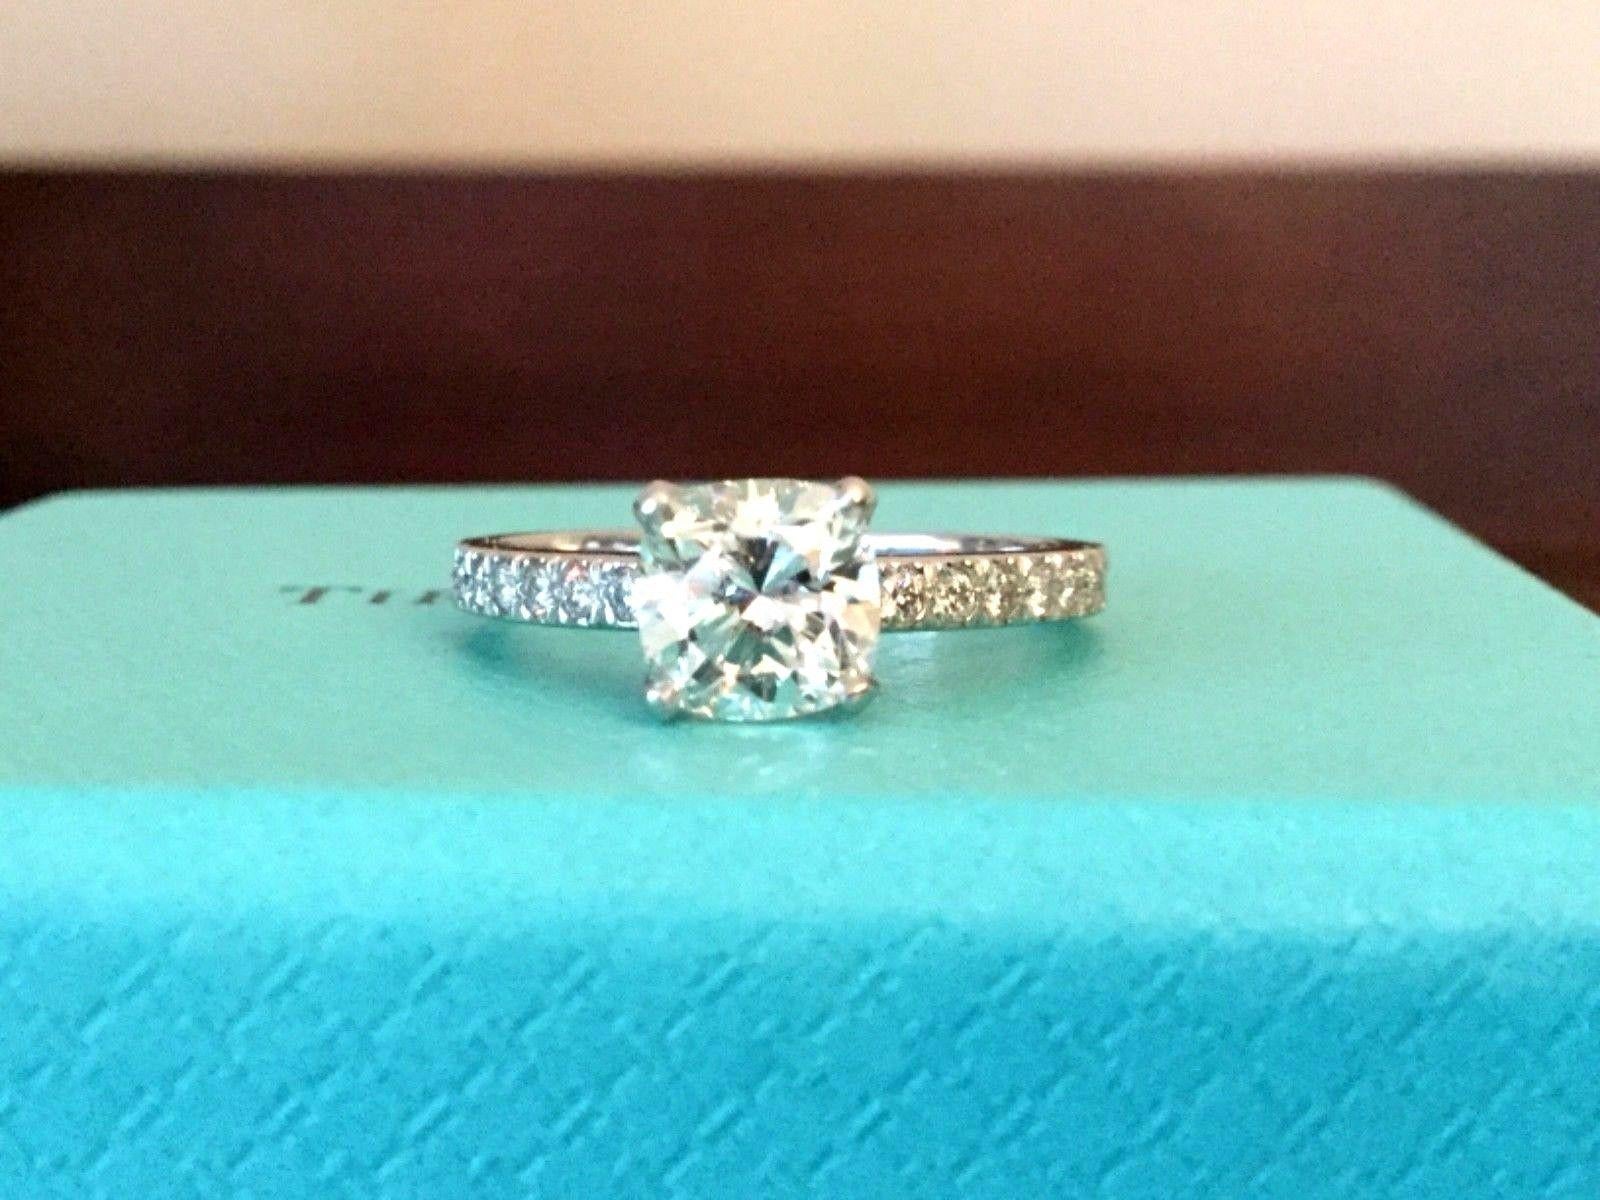 Being offered for your consideration is a like new Tiffany & Co Platinum and Diamond .95 carat natural cushion cut NOVO engagement ring set in the classic NOVO pave diamond band..  This ring was hardly worn and can pass for a BRAND NEW ring!  There